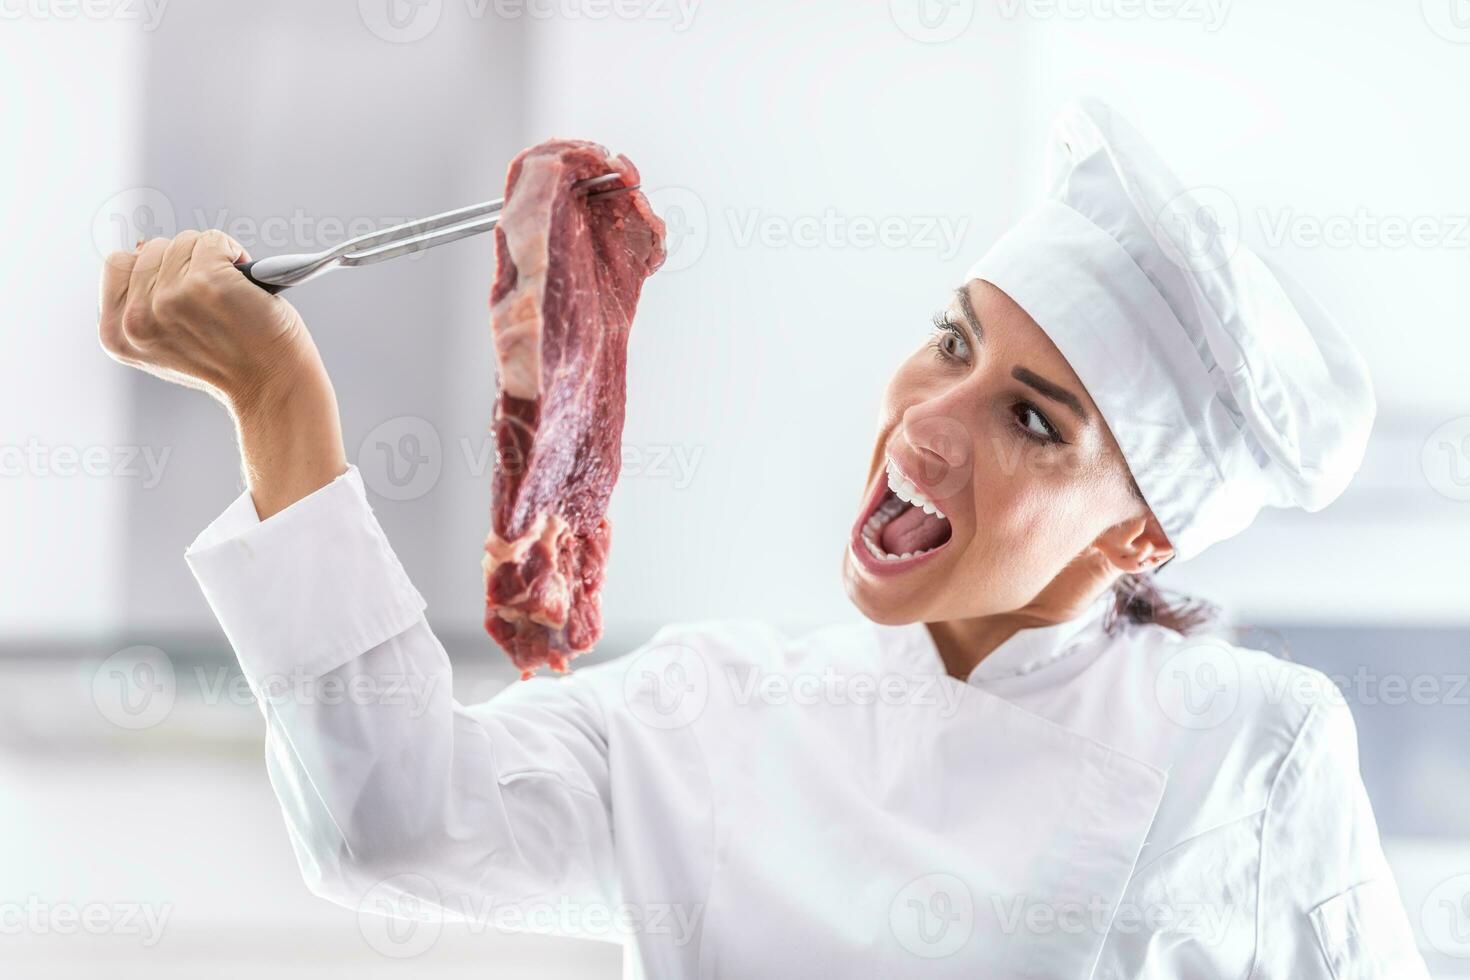 Female chef in rondon pretends wanting to bite into a raw cut of red meat she holds on a fork photo